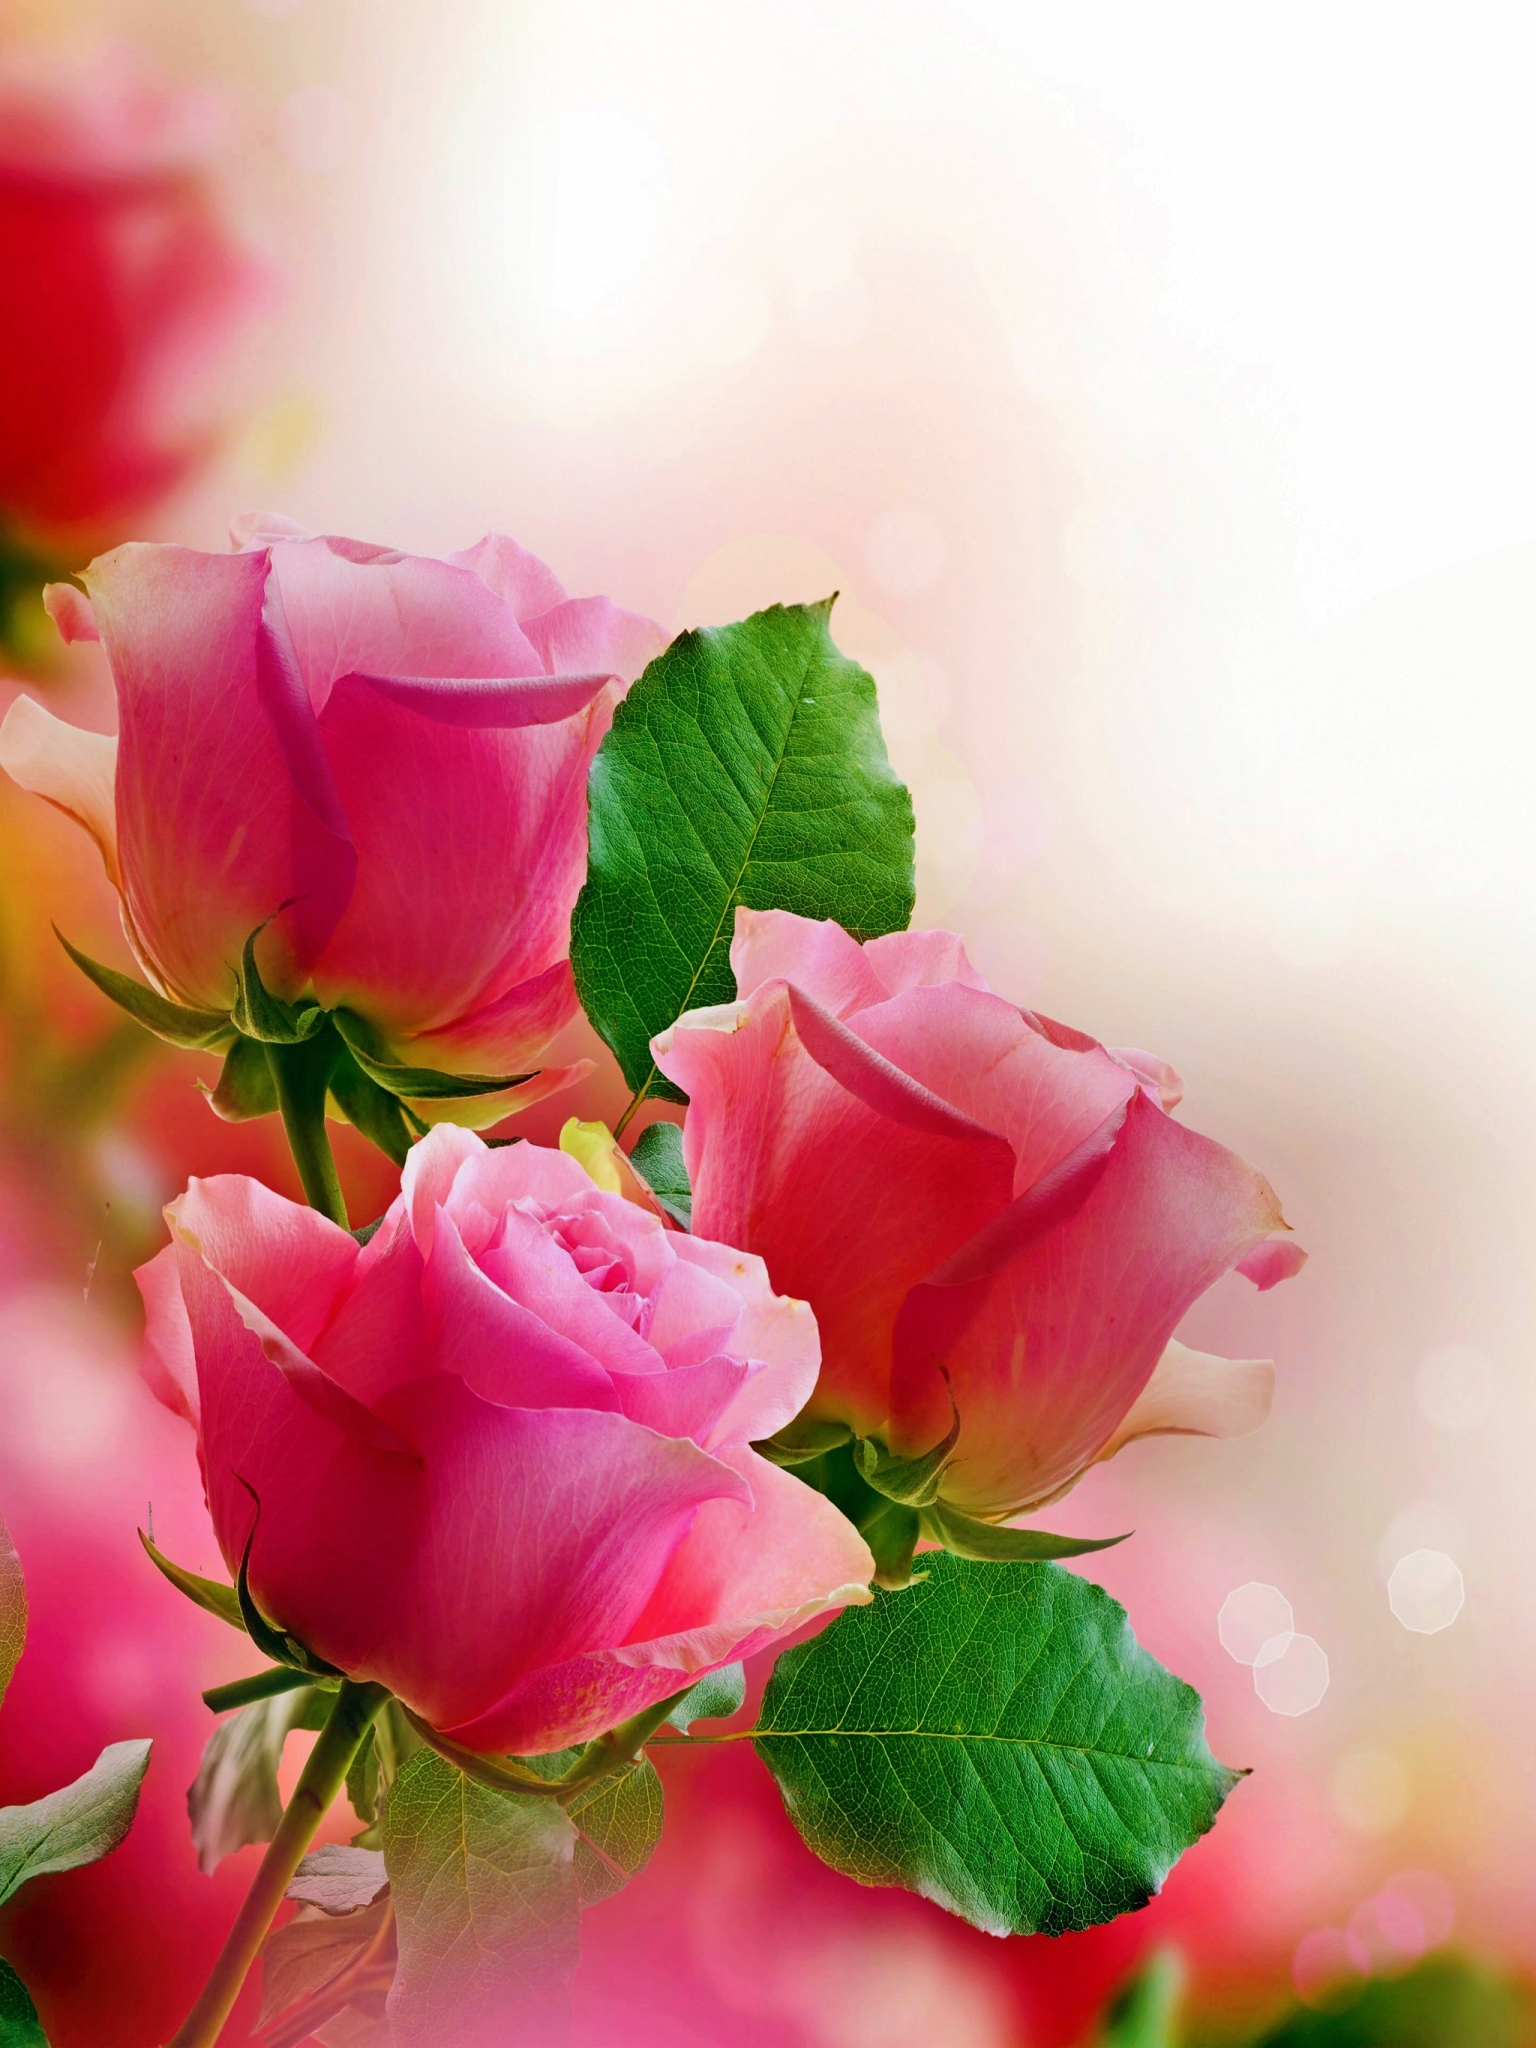 Pink Roses for Apple iPad Air 2 resolution